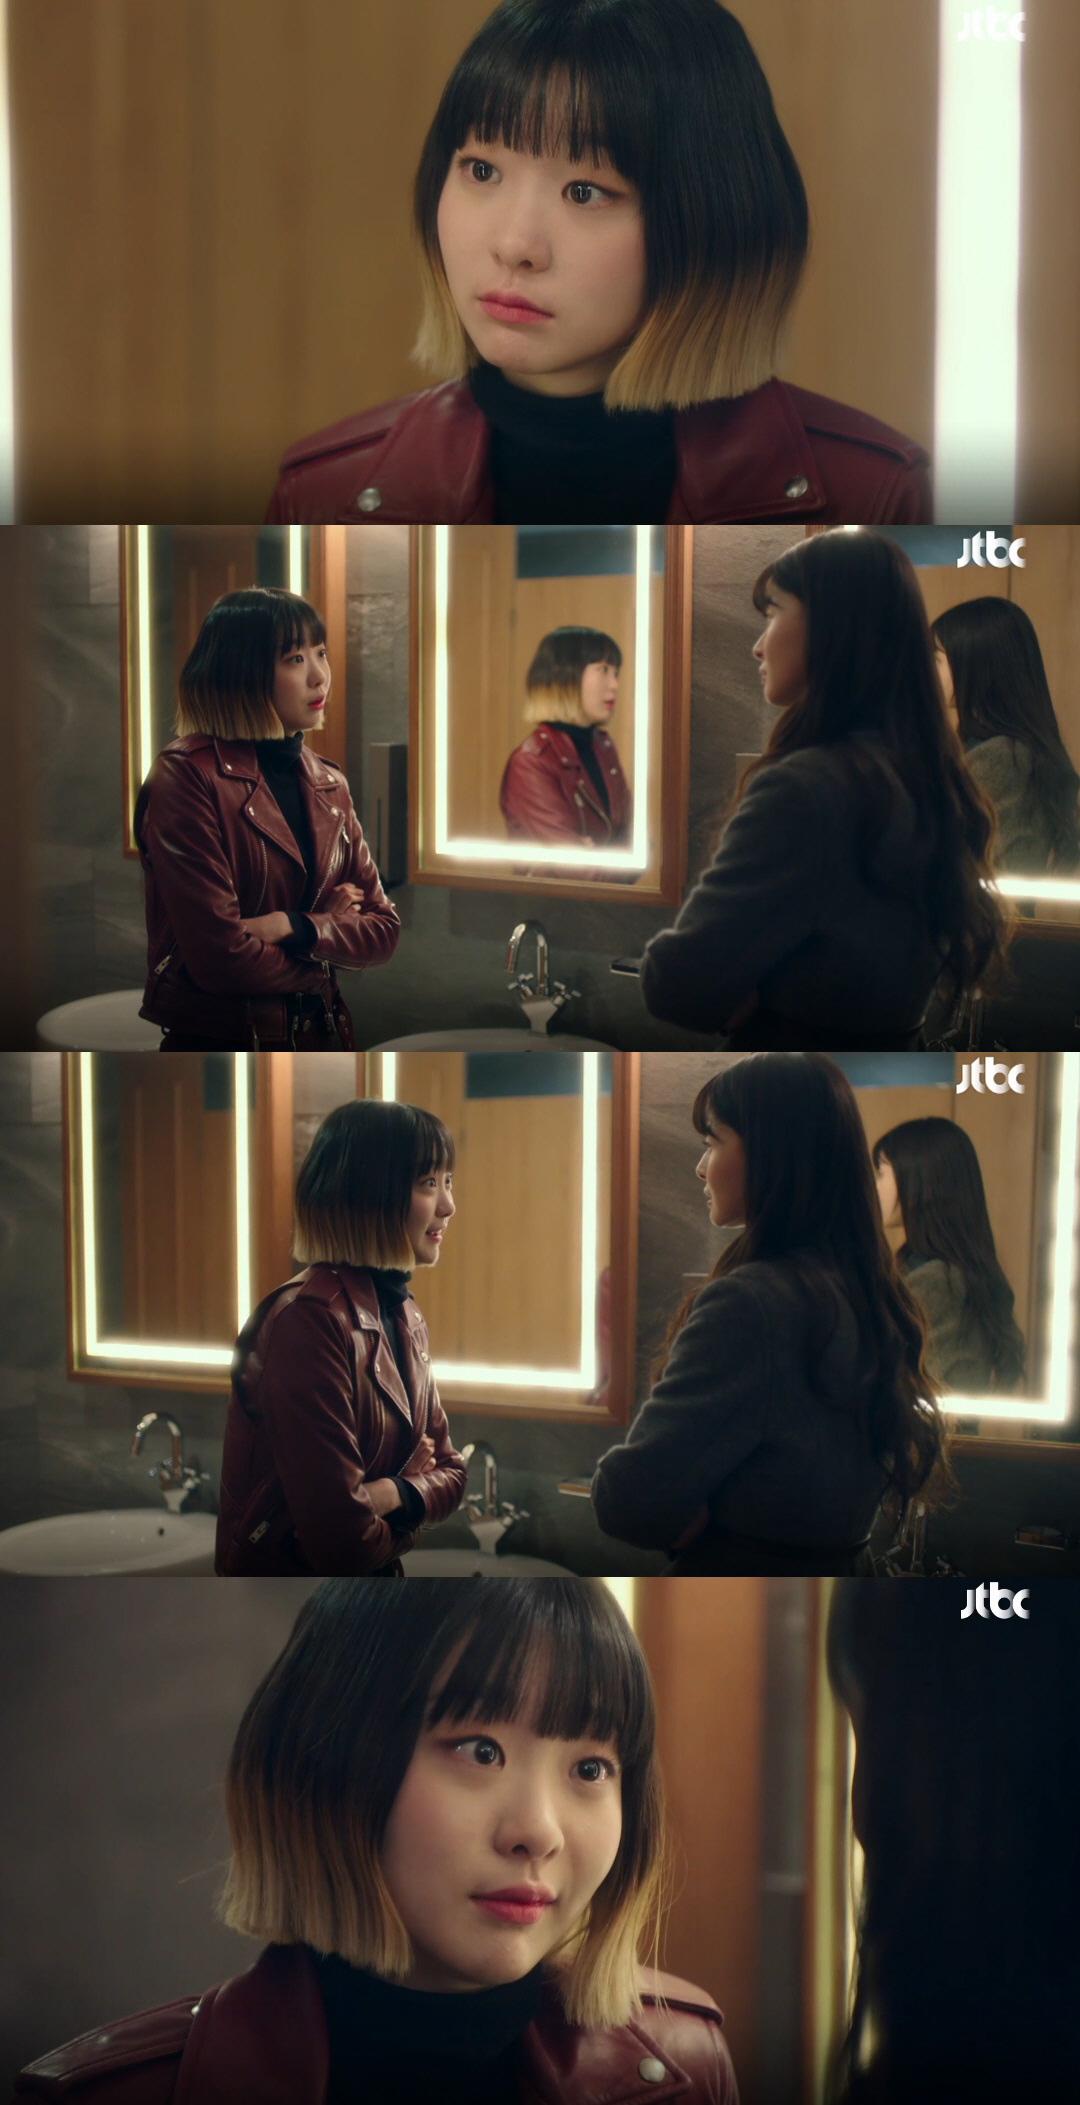 On the 15th JTBC gilt drama Itaewon Clath, Joe-yool Lee (Kim Da-mi) was shown expressing his feelings without hesitation to I like Park Seo-joon to SuA (Kwon Nara), who became Stradivarius at the first dinner of the night. ...Joe-yool Lee was confronted by SuA while on the move to a new and sweet night dinner venue.Then, when the drunk SuA suddenly approached him to kiss him suddenly, Seo-young Lee, who liked him, said, Captain 32.The kiss without the consent of the other party is a forced molestation. Despite not being a sweet night family, Seo-yool Lee, who became Stradivarius at the dinner party with SuA, did not hide his discomfort but followed without rejecting the decision of the unrequited new.When the dinner was ripe for a long time, they met in the bathroom, and soon Seo-young Lee showed a dignified appearance that he did not hesitate to suA, throwing a stone fastball to him for his new love.Kim Da-mi expresses Joe-yool Lees unrequited love acting with honest and thorough acting ability, making viewers feel emotional.It is noteworthy how Kim Da-mi, who shows endless unrequited love for Park Seo-joon, who will give up everything he has and make Park Seo-joon a great man, will be able to achieve Park Seo-joons dream in the future.